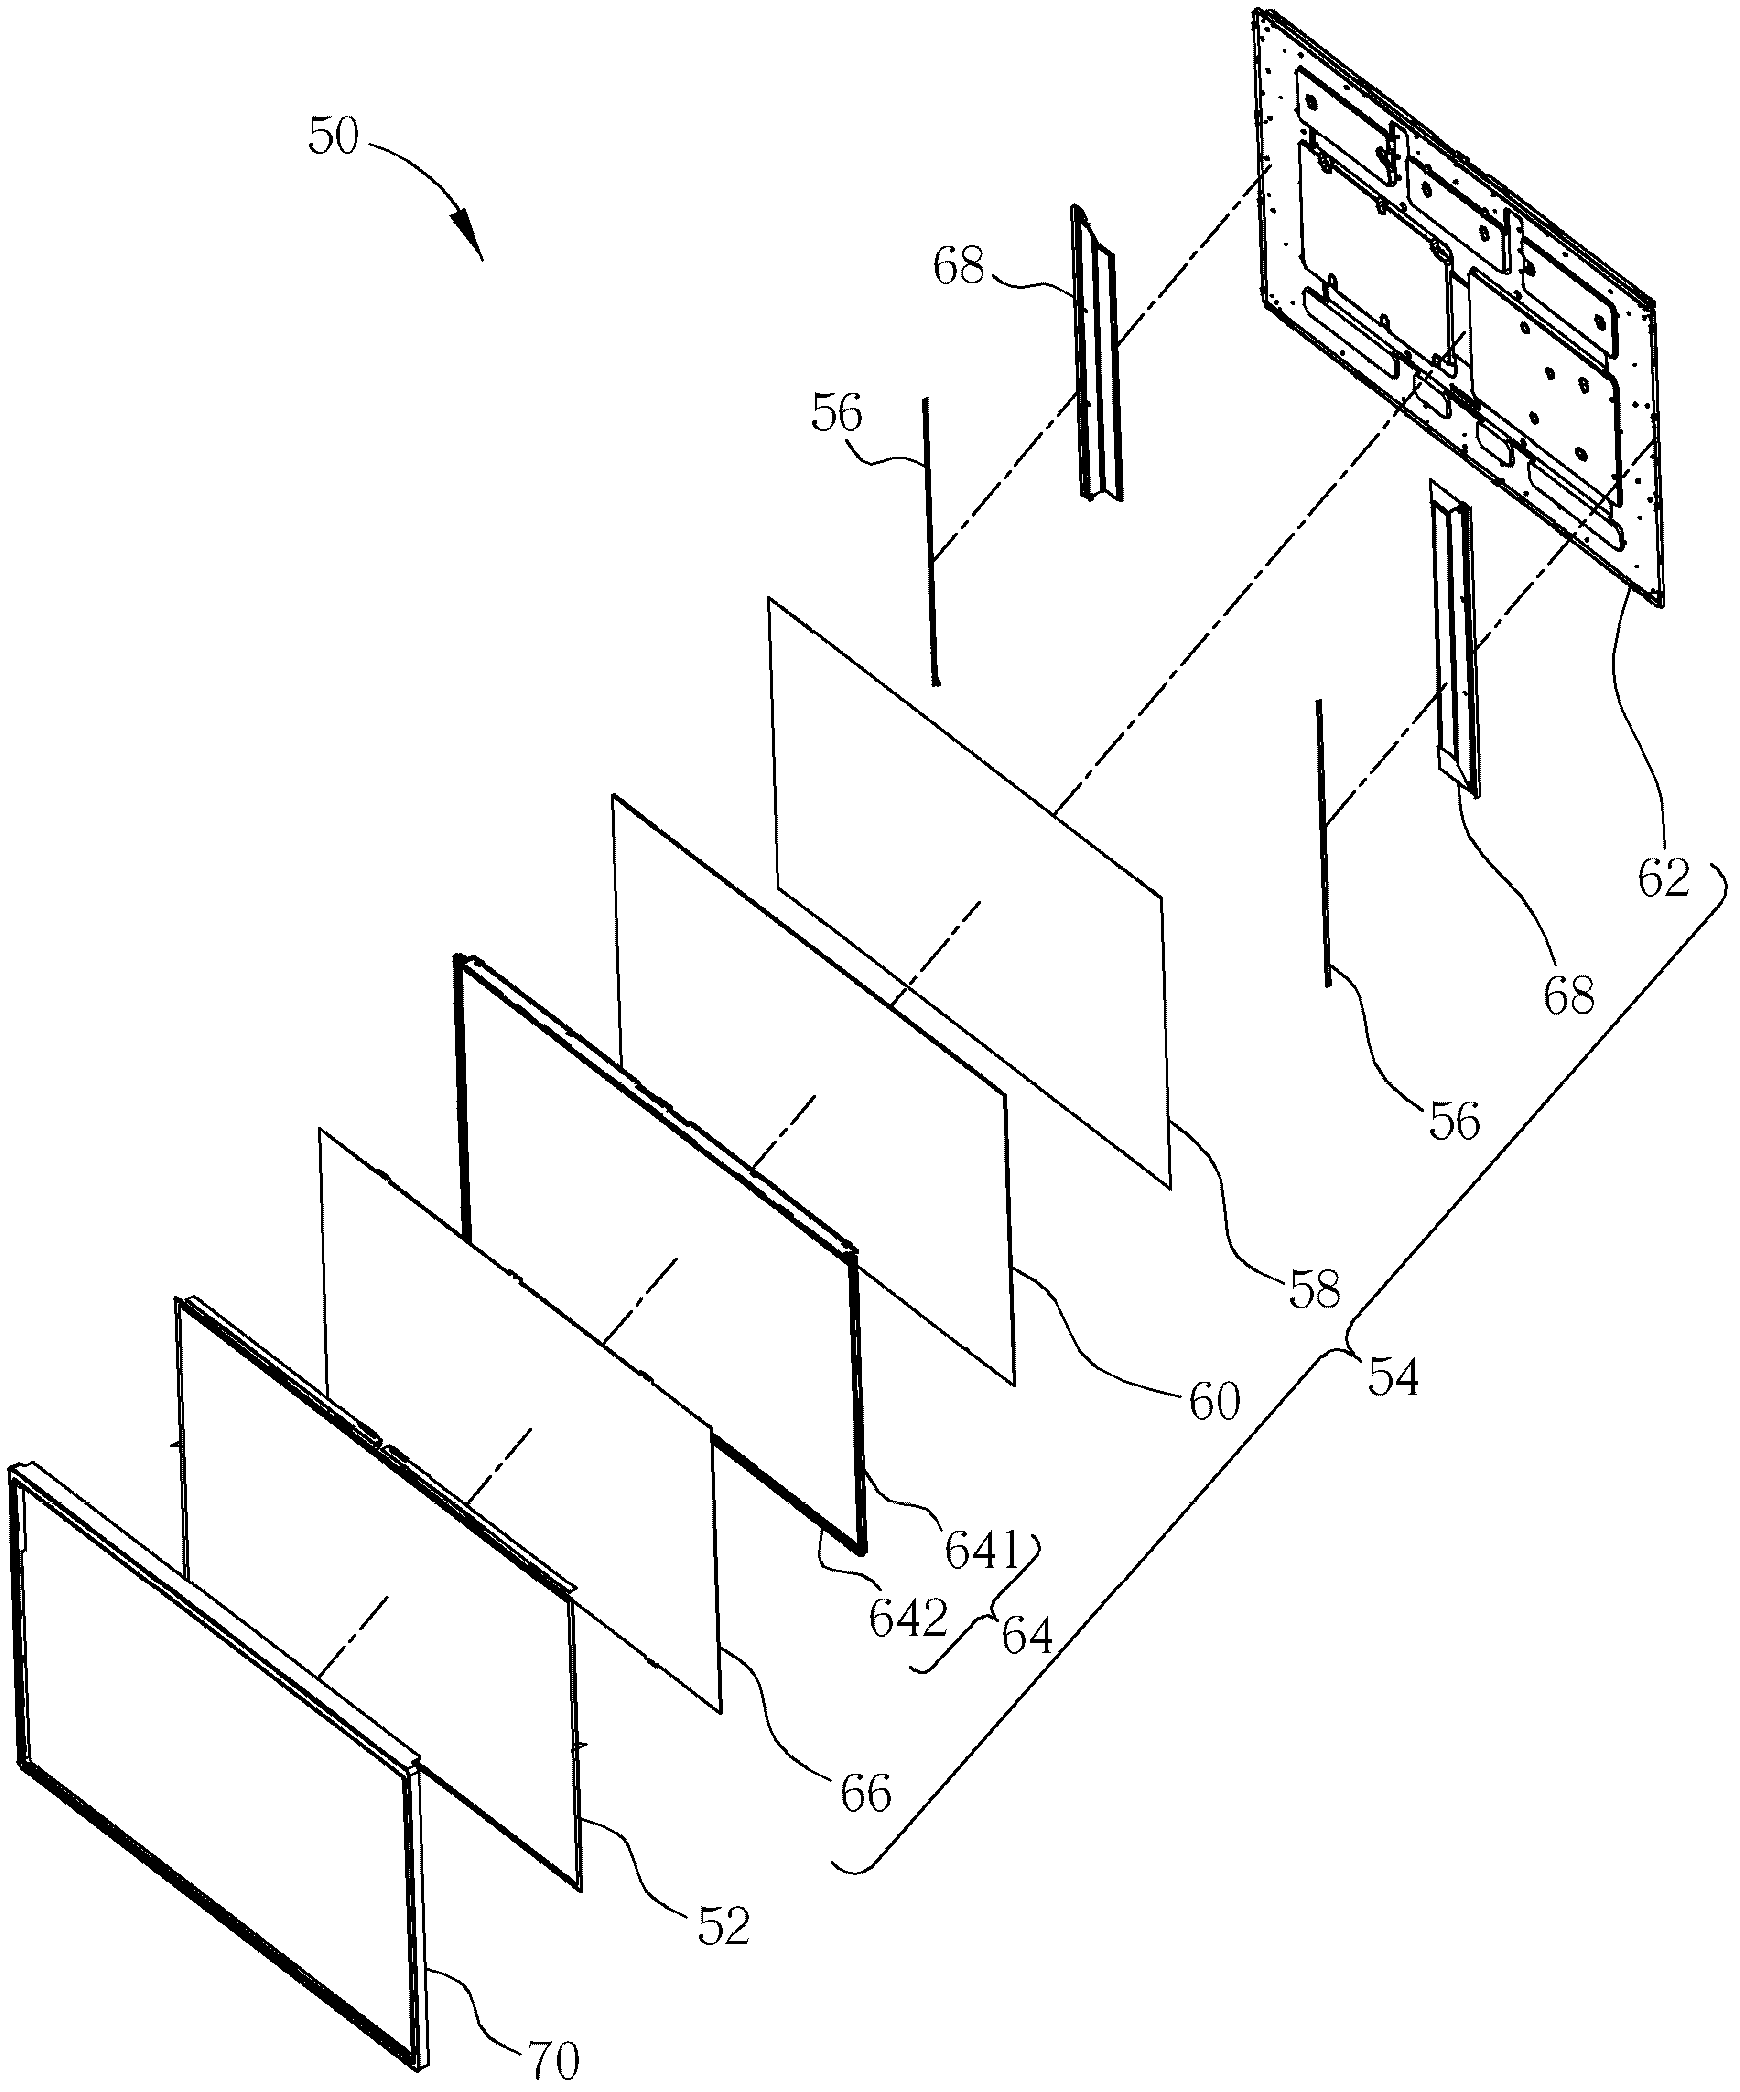 Backlight module for providing light to a display panel and display device therewith